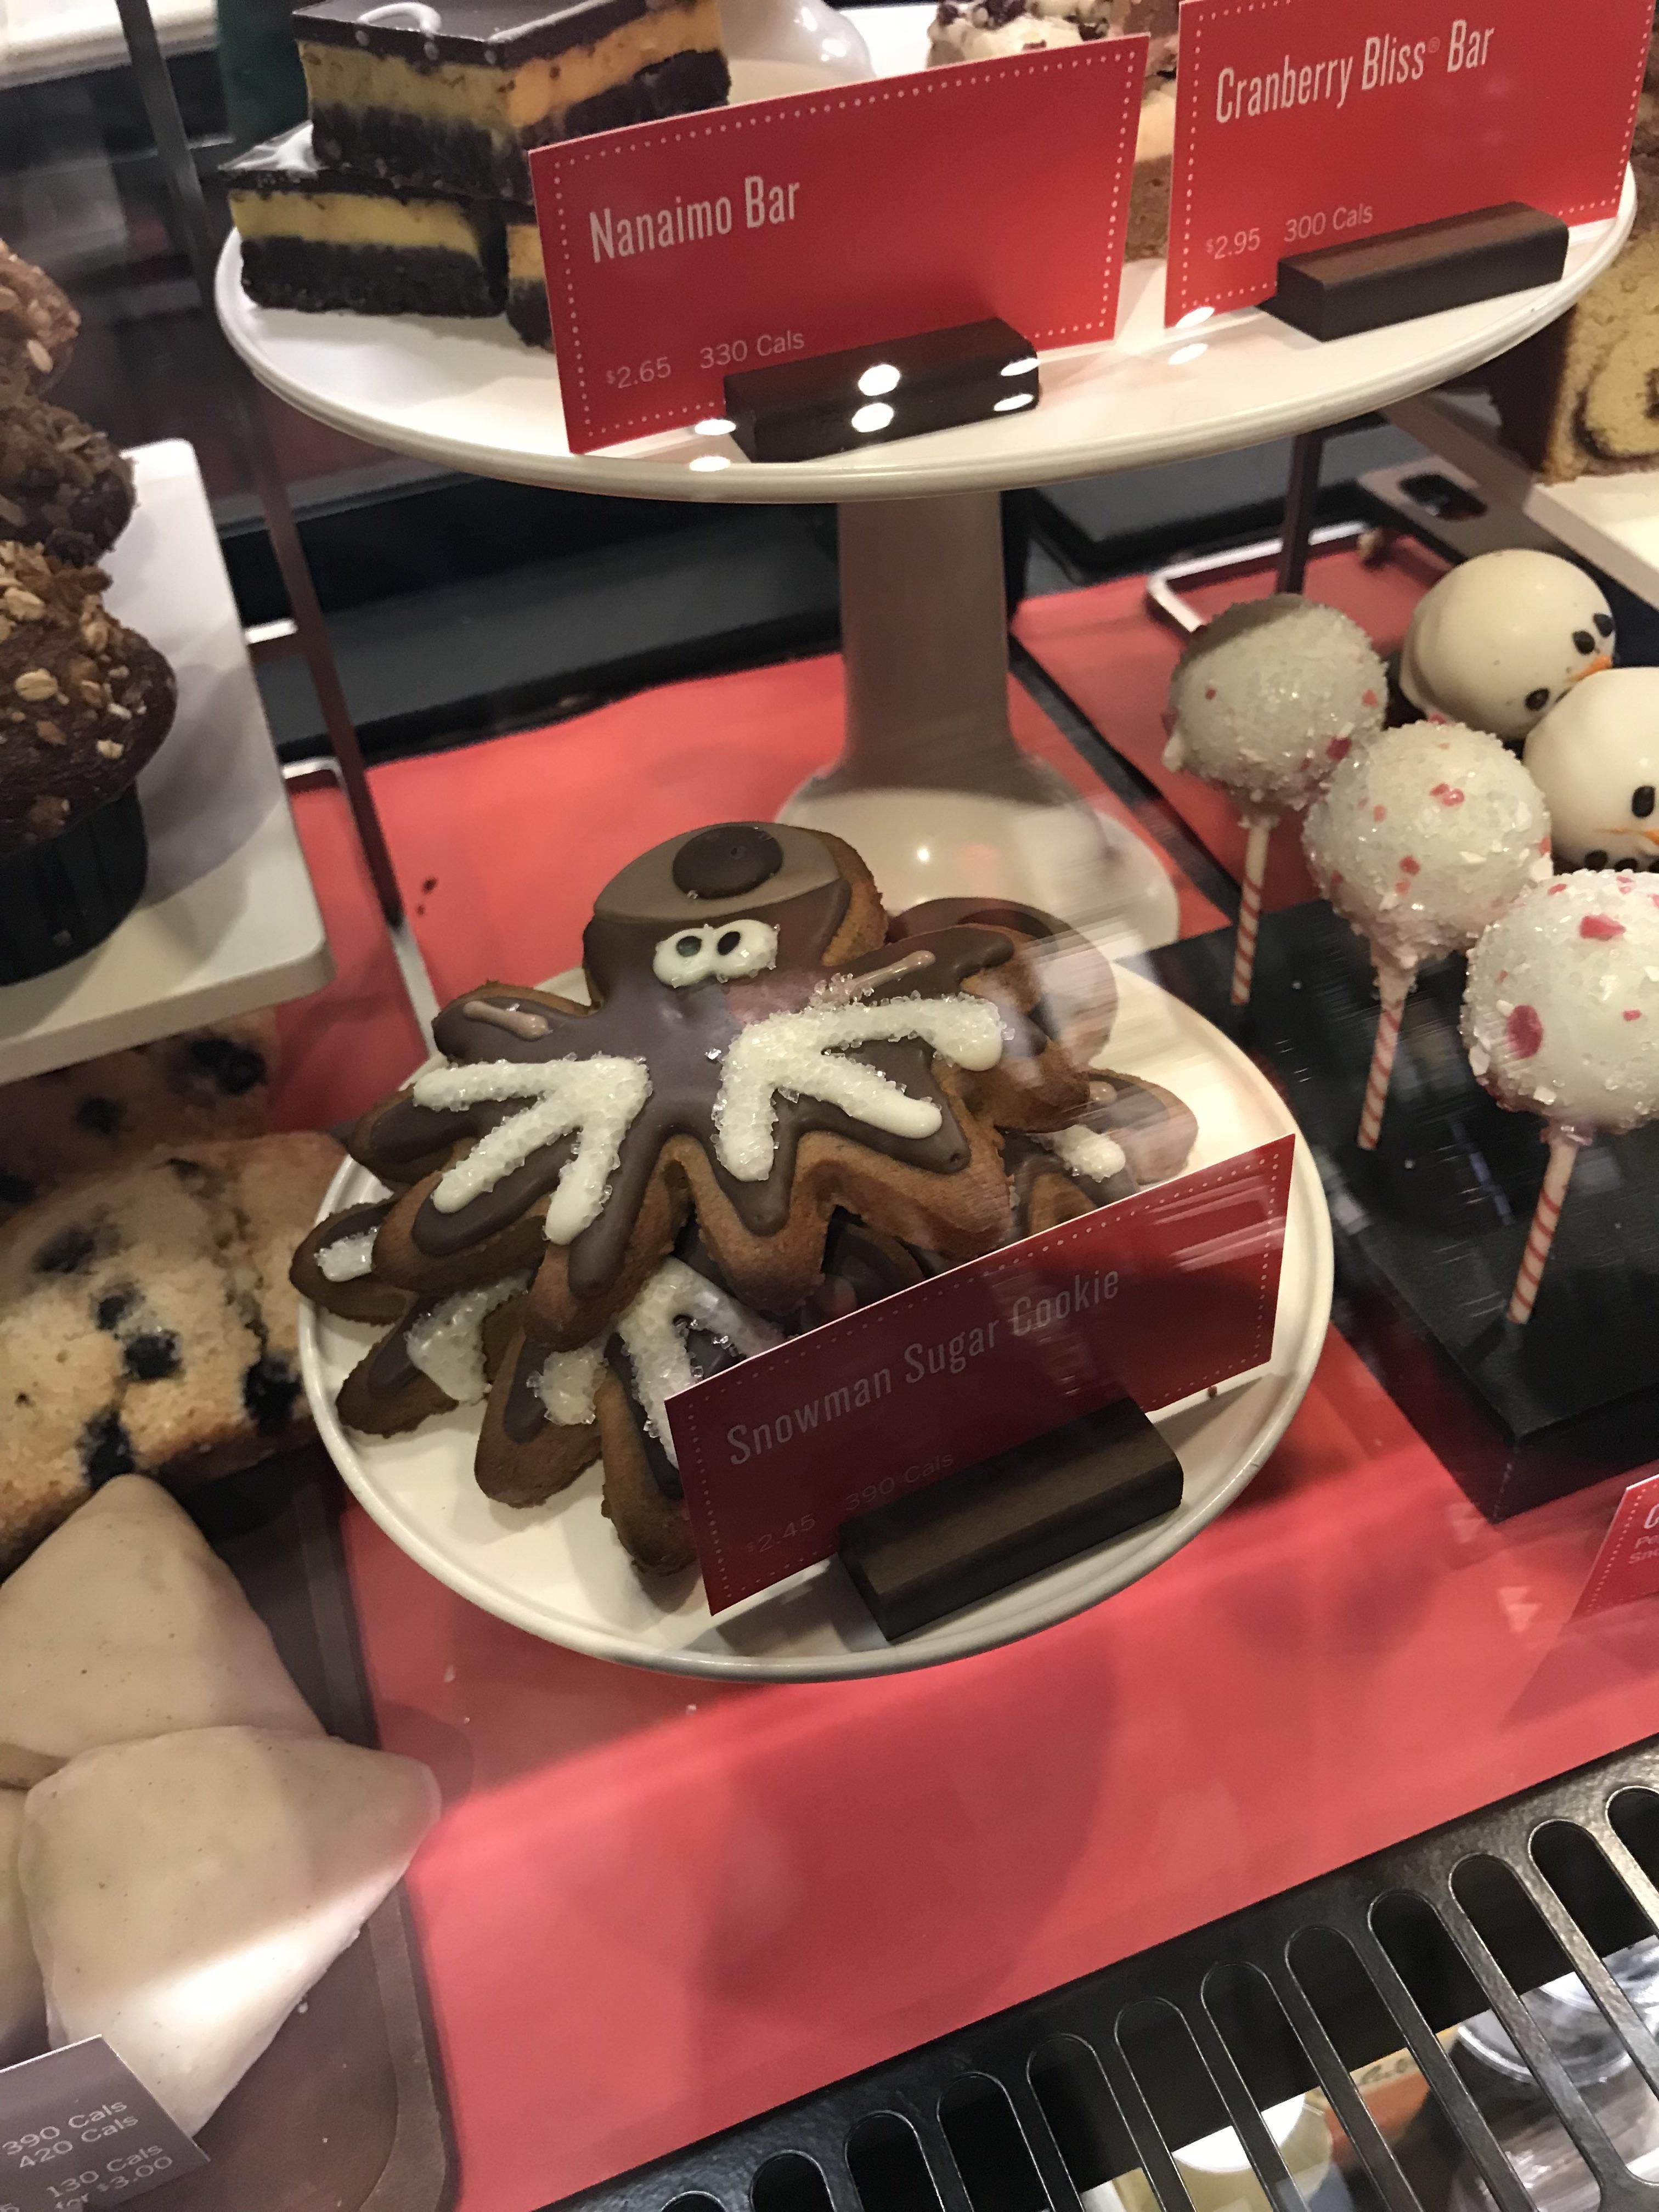 Couldn’t figure out why Starbucks is selling a Christmas octopus...